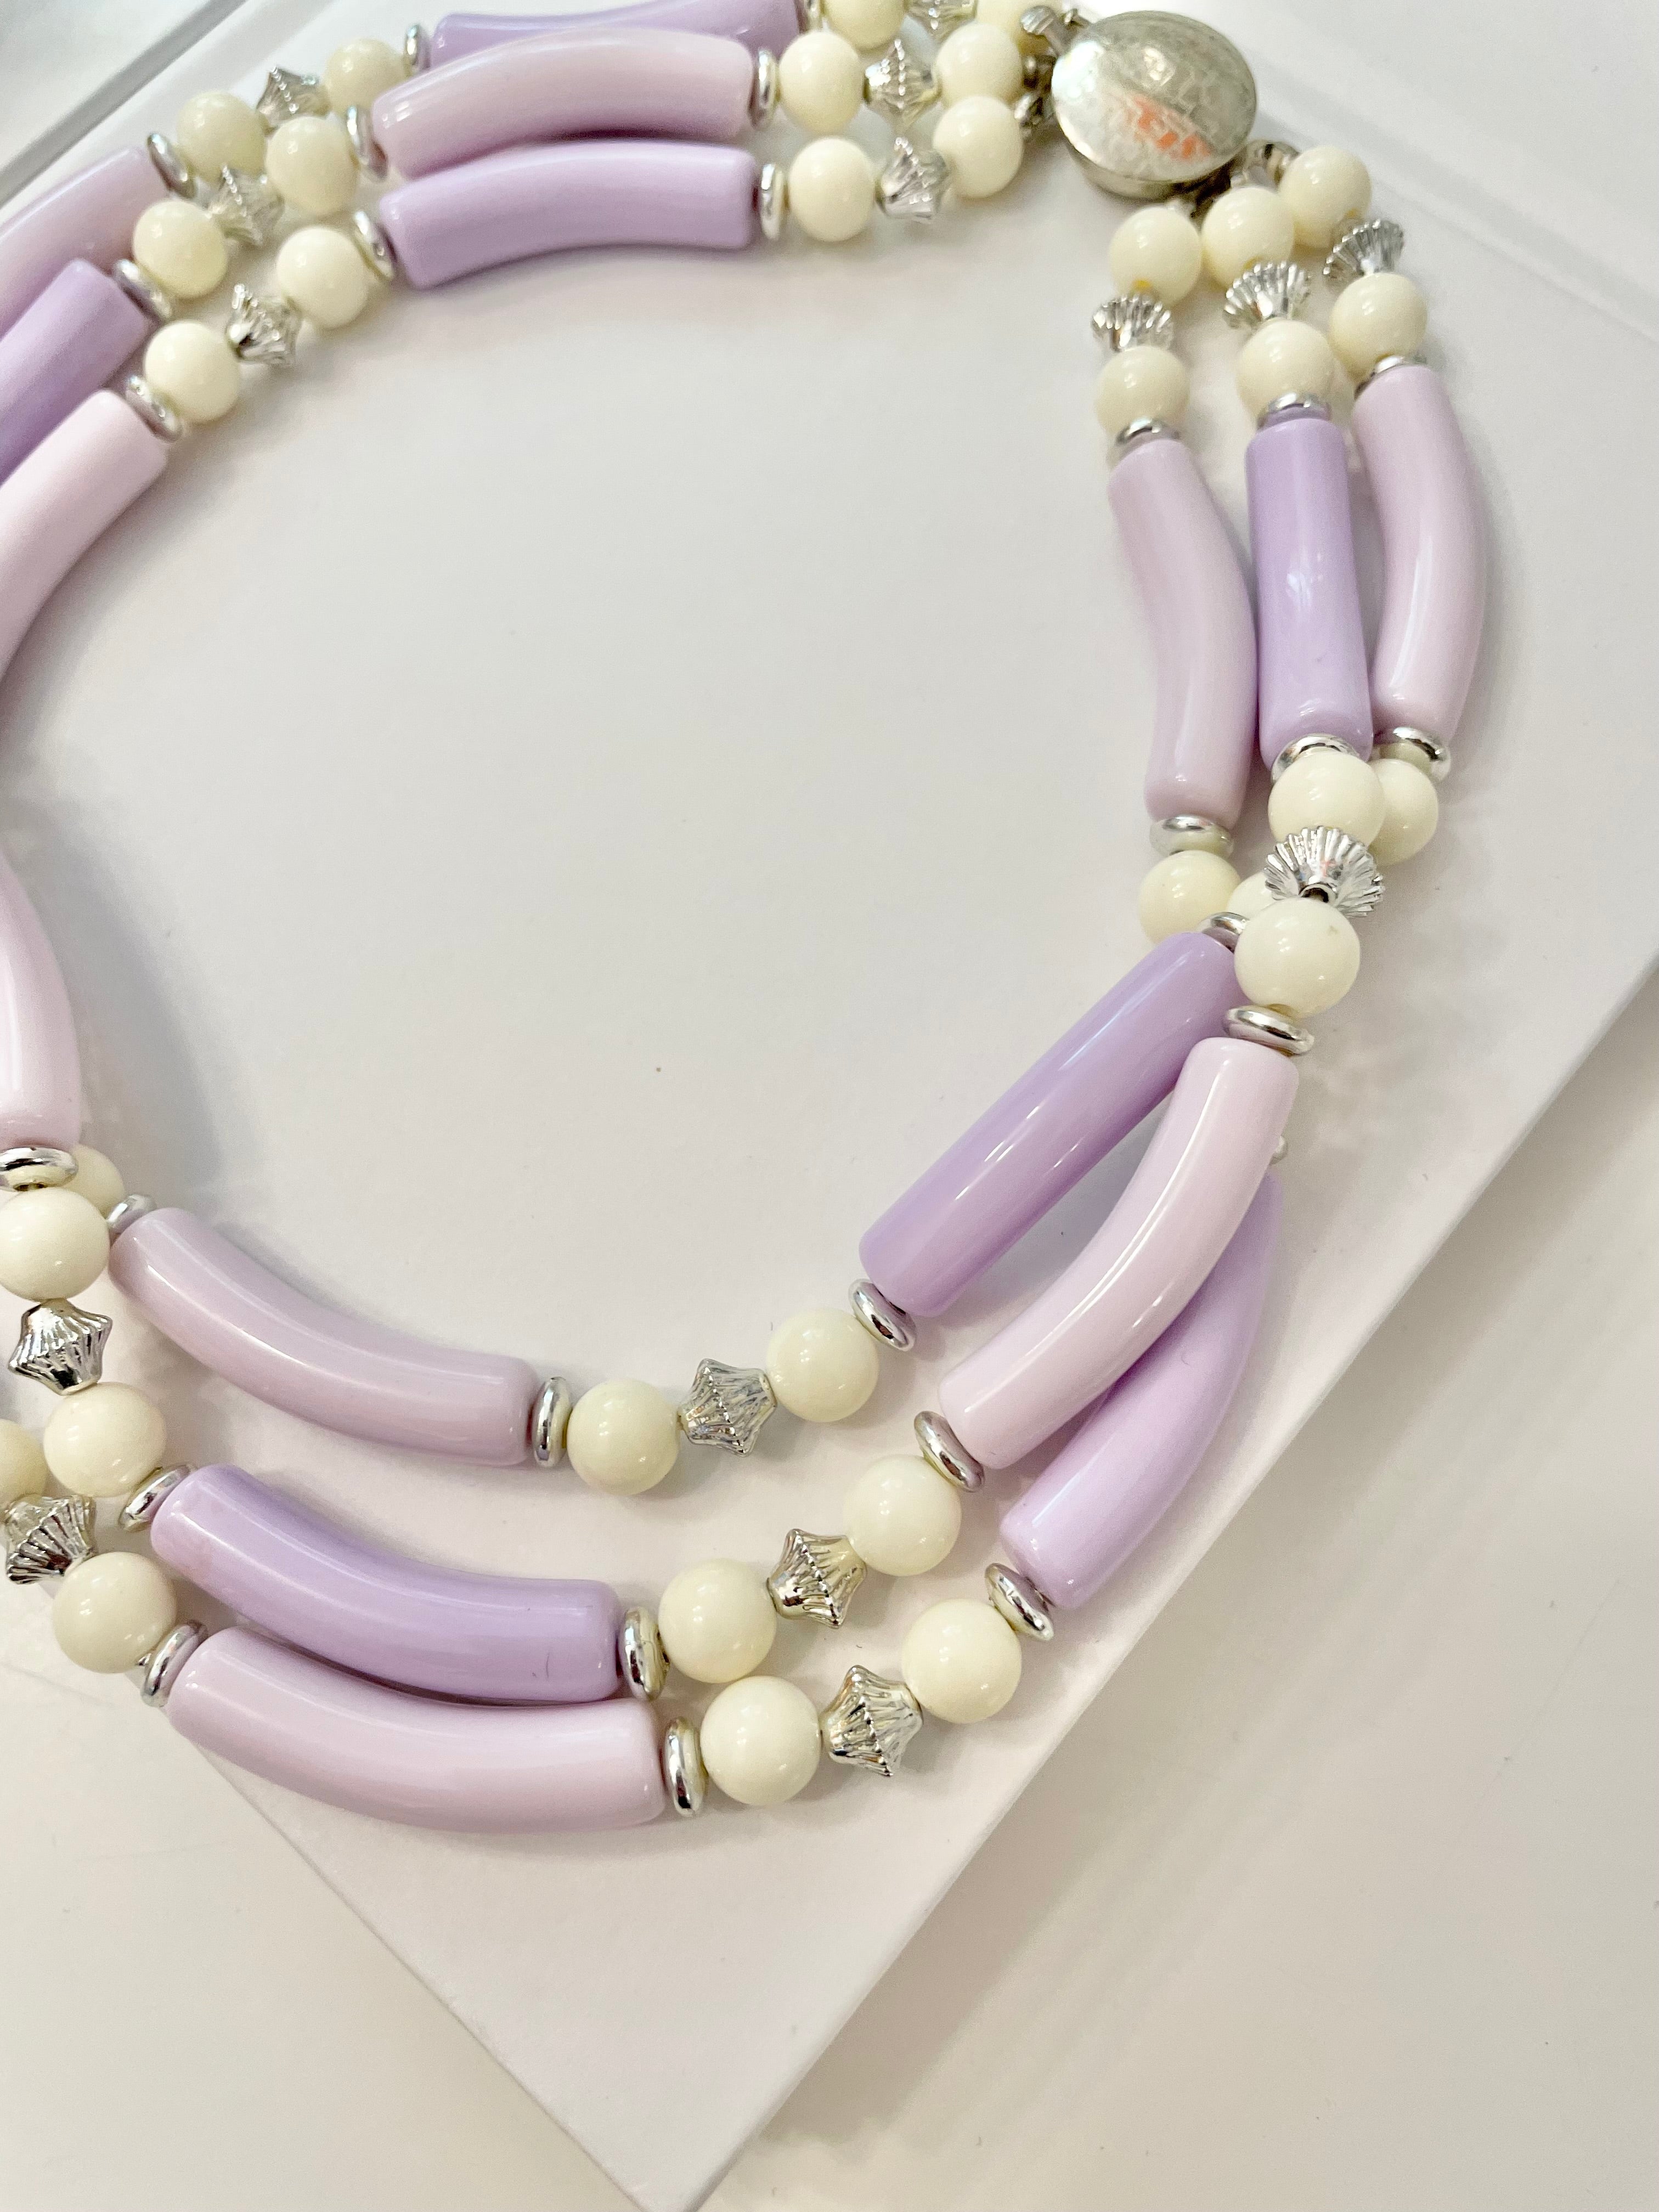 This 1960's soft purple multi strand delightful necklace is so feminine, and so chic... love this color story.